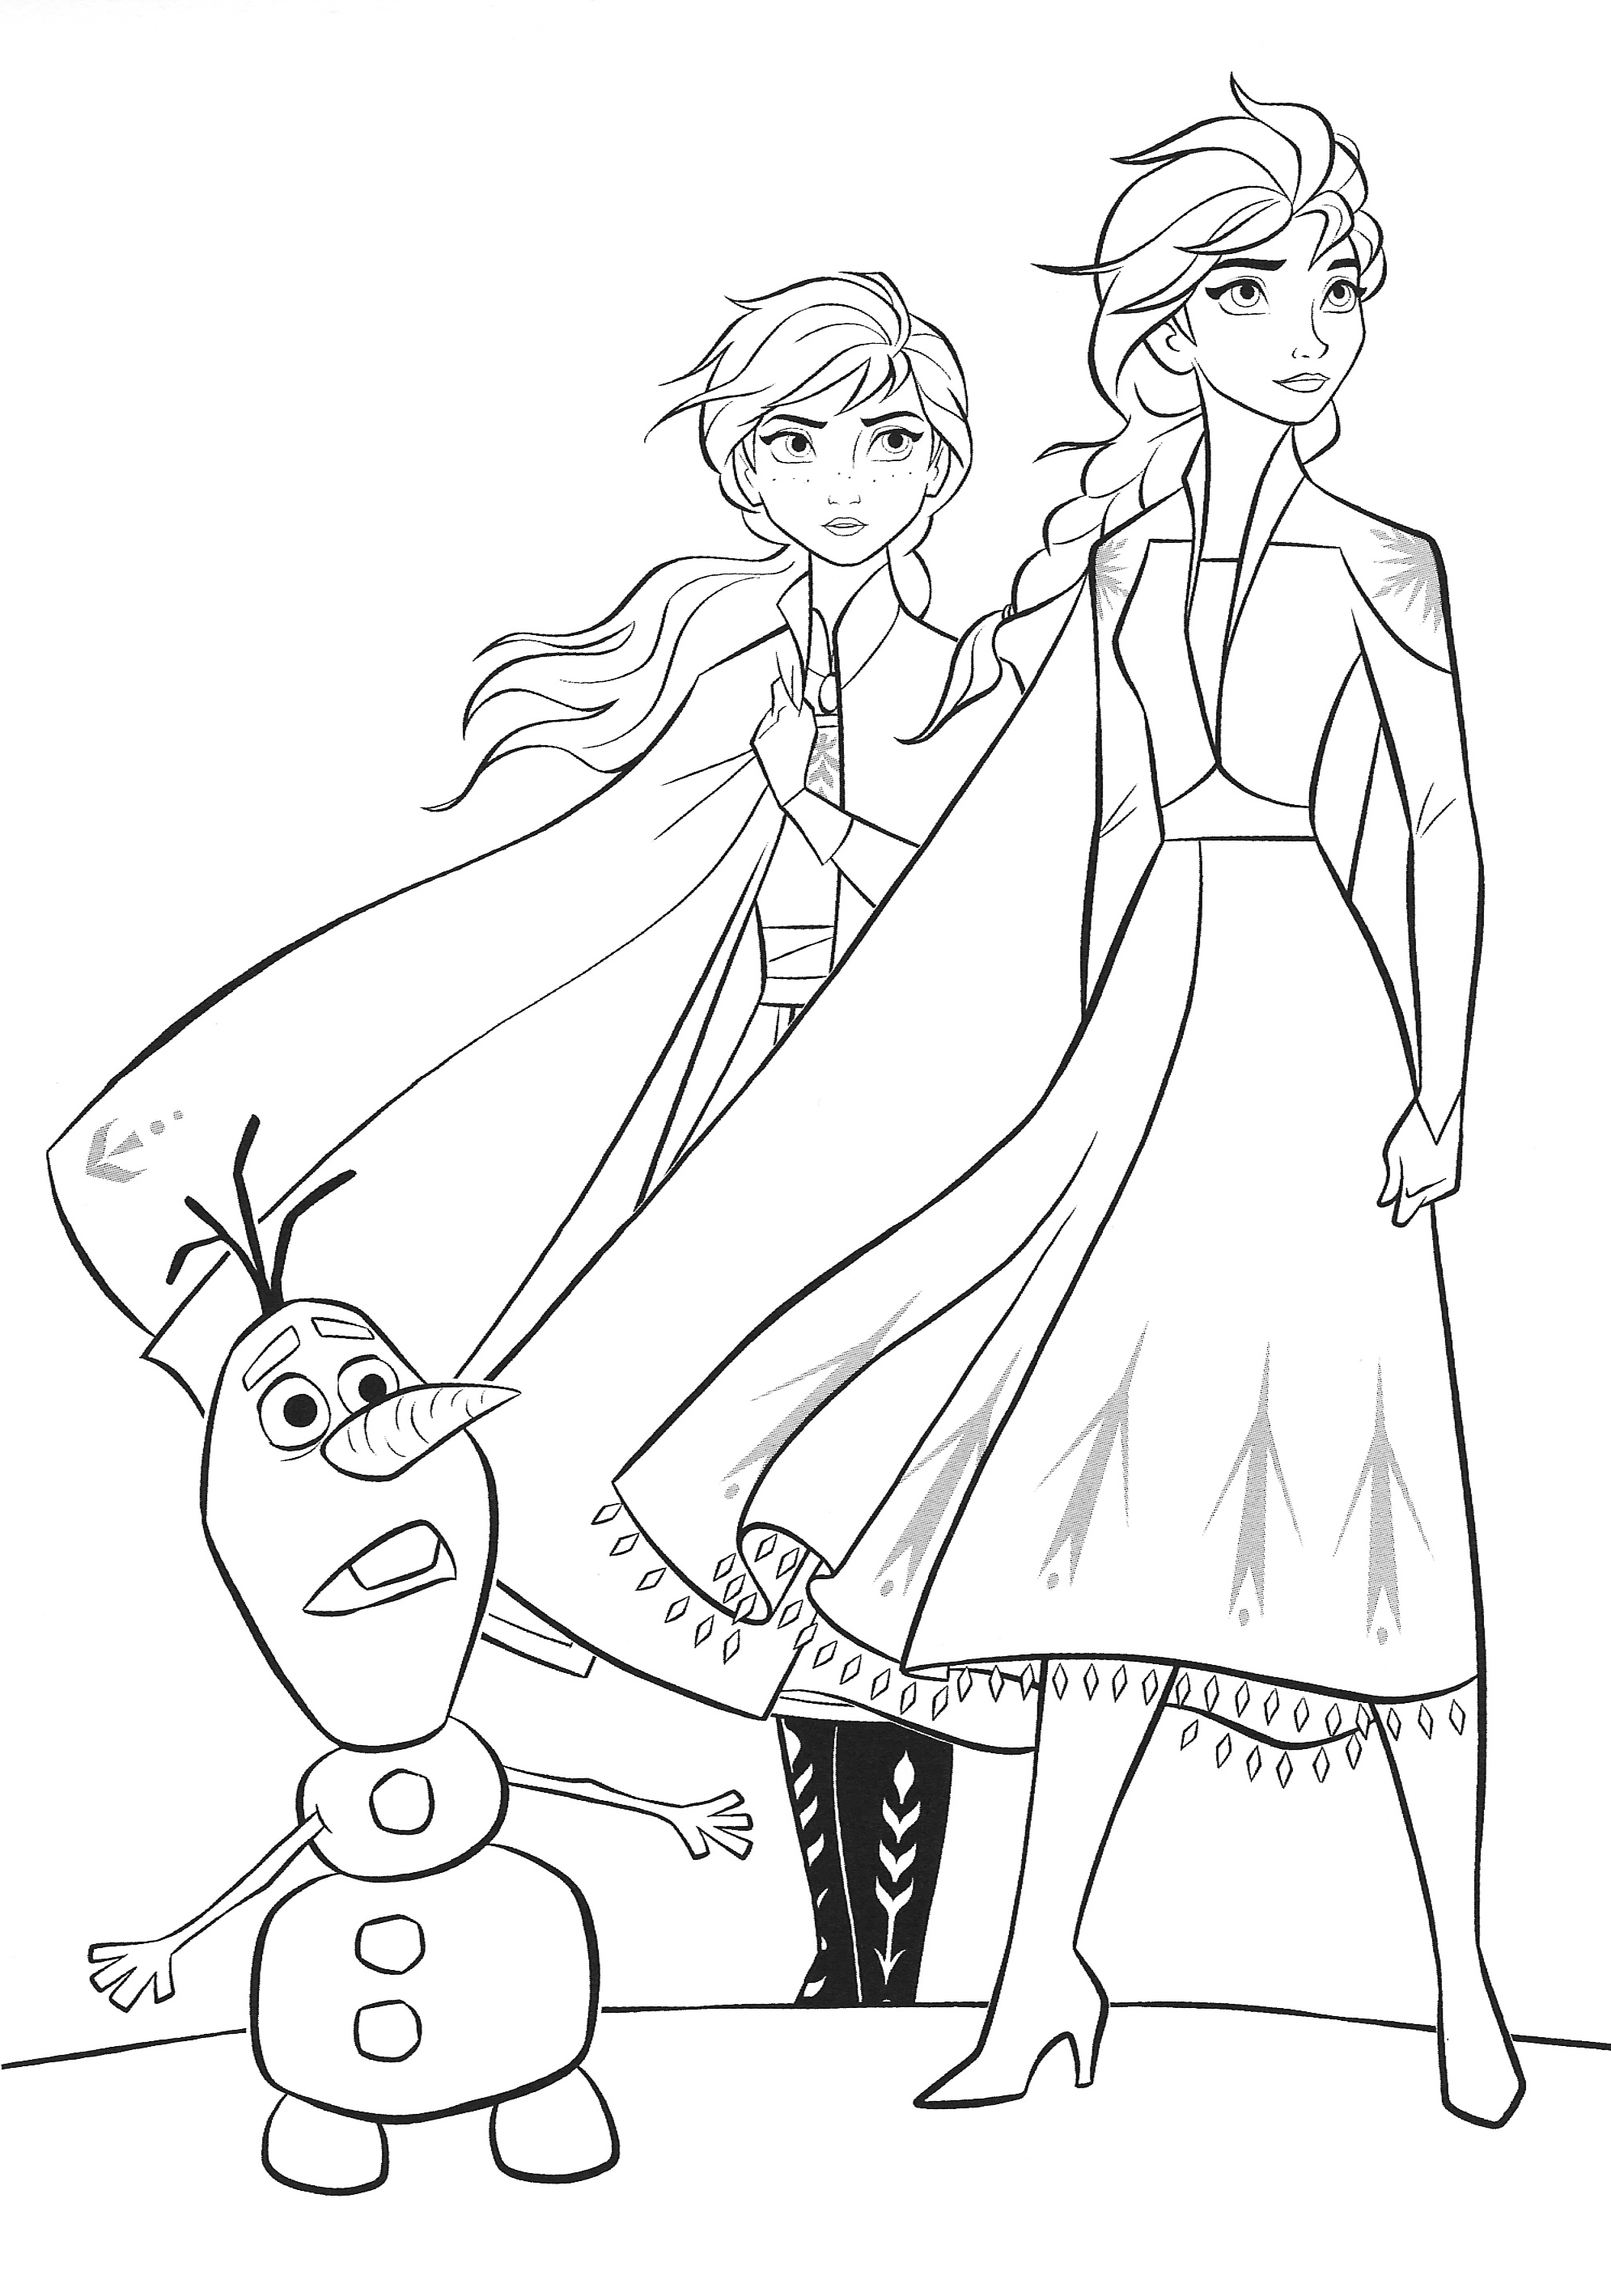 Get Cute Baby Elsa And Anna Coloring Pages Pictures - COLORING PAGES